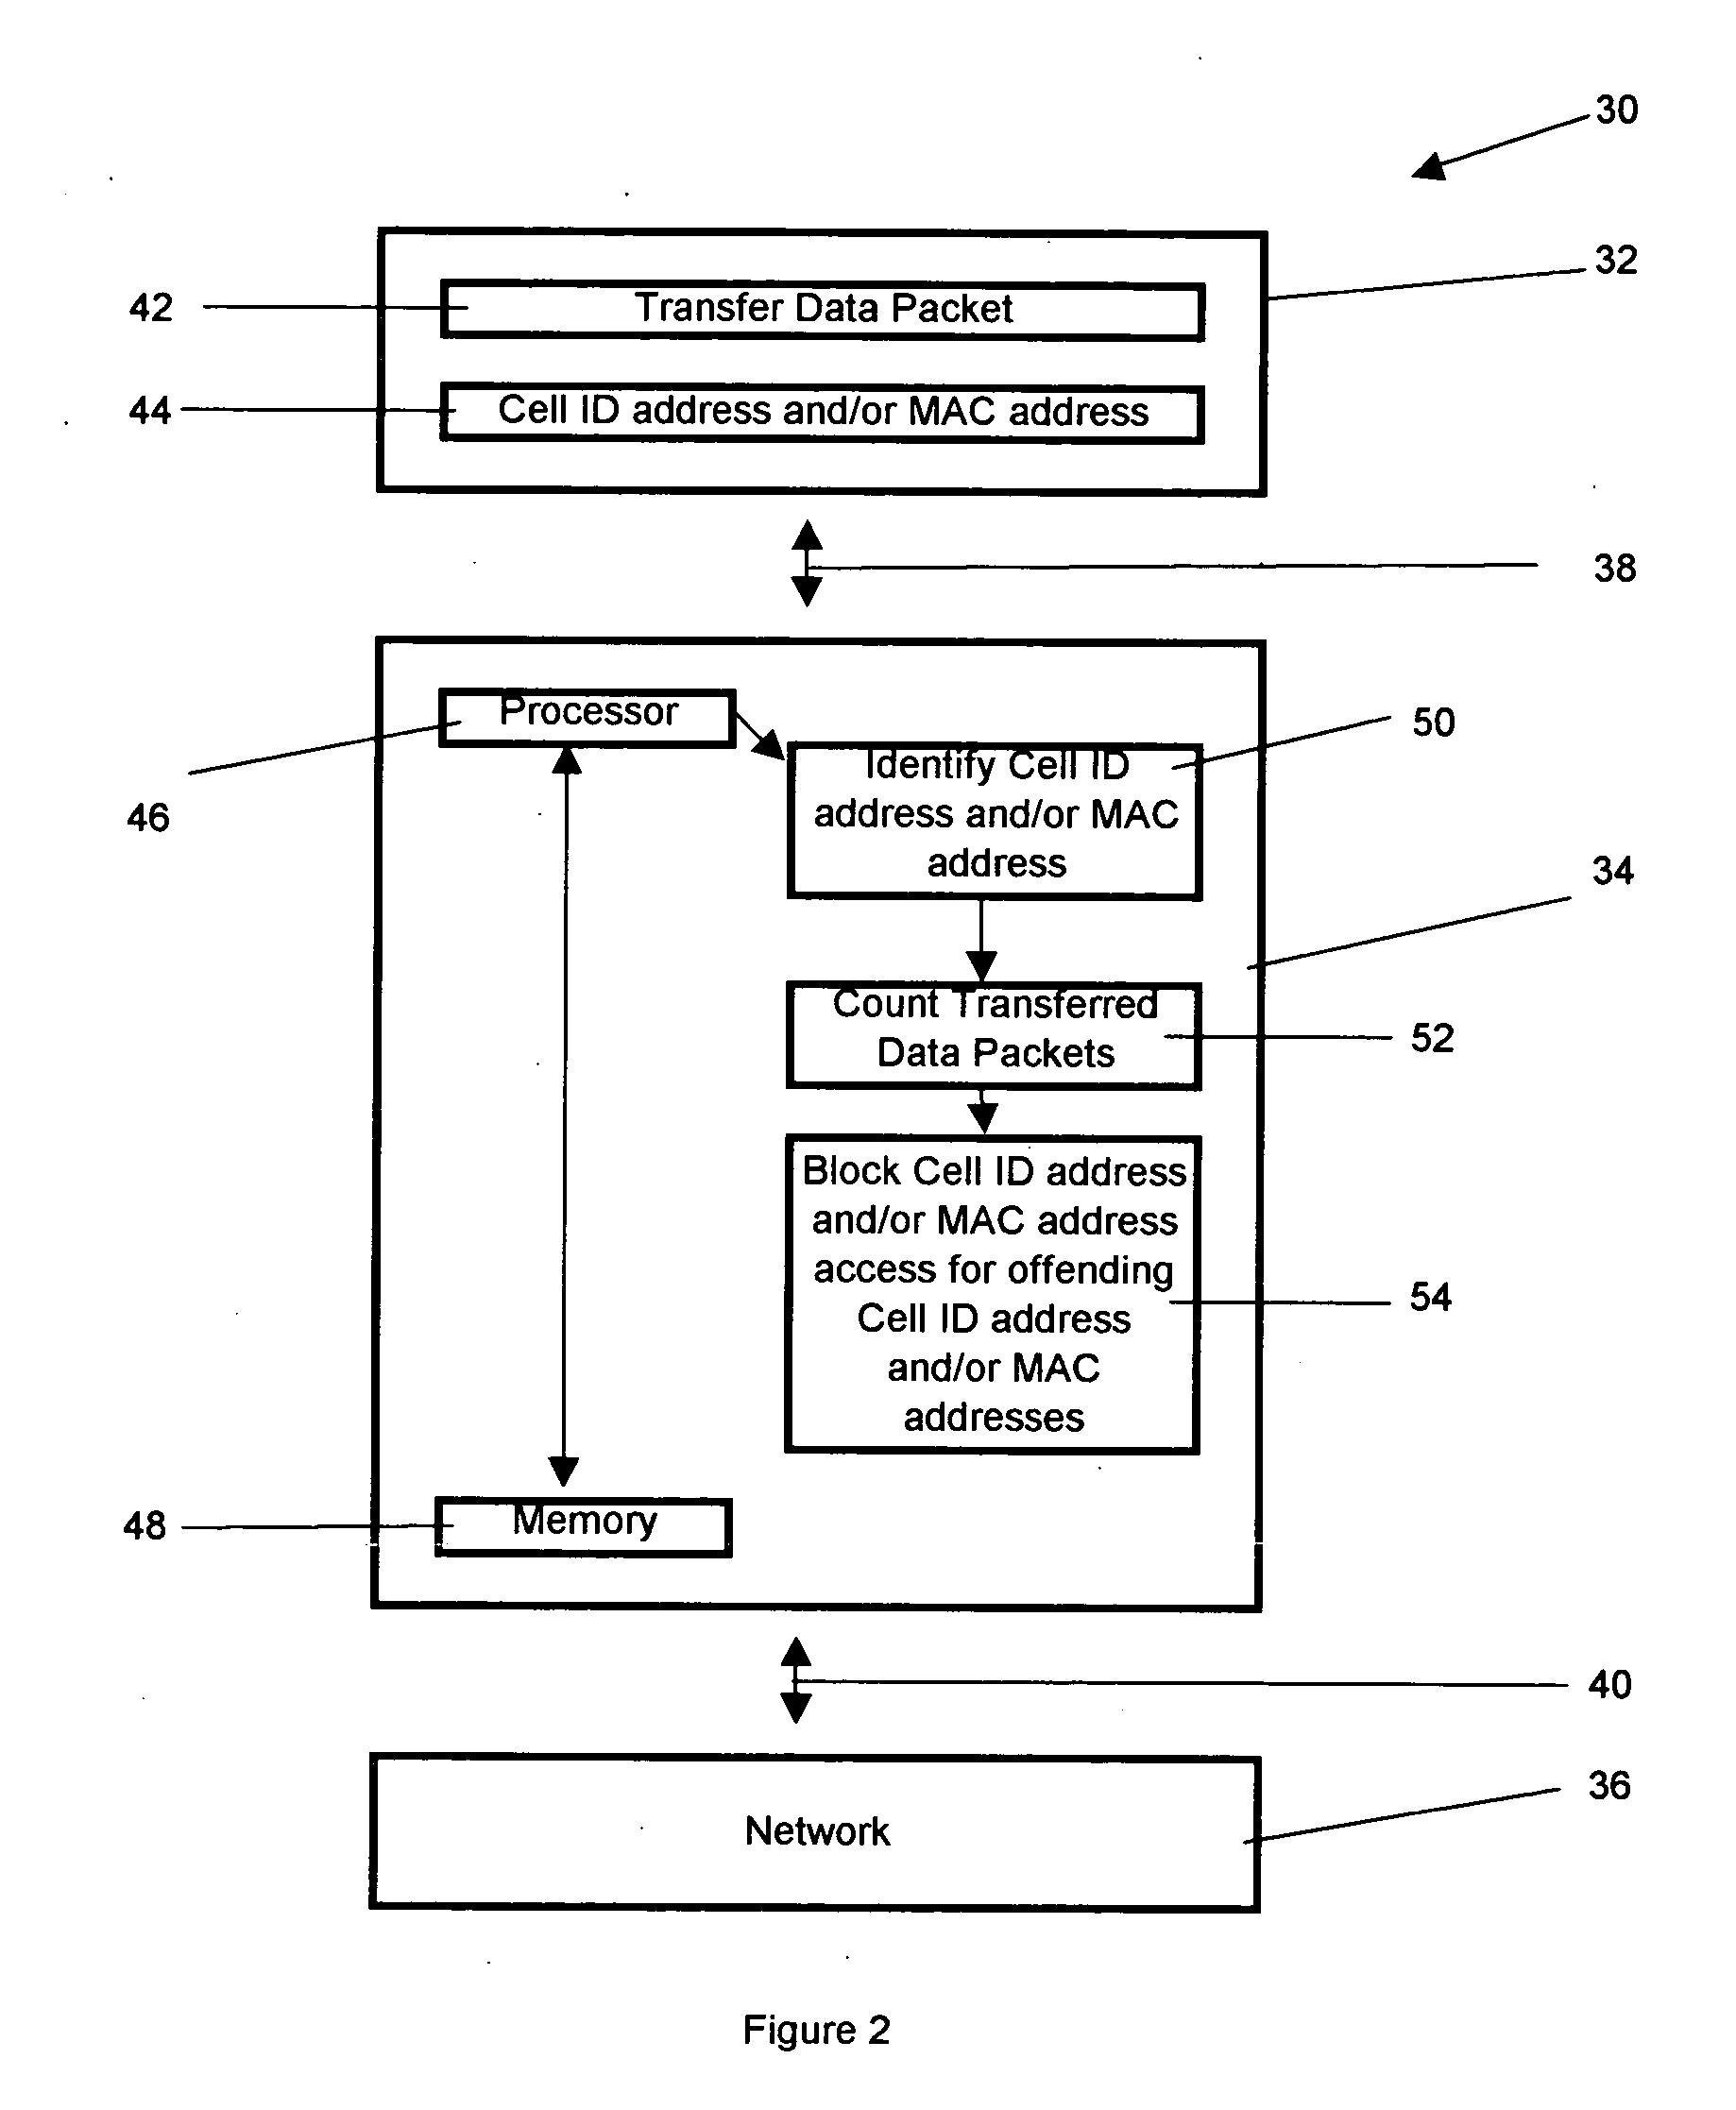 Method of preventing denial of service attacks in a cellular network